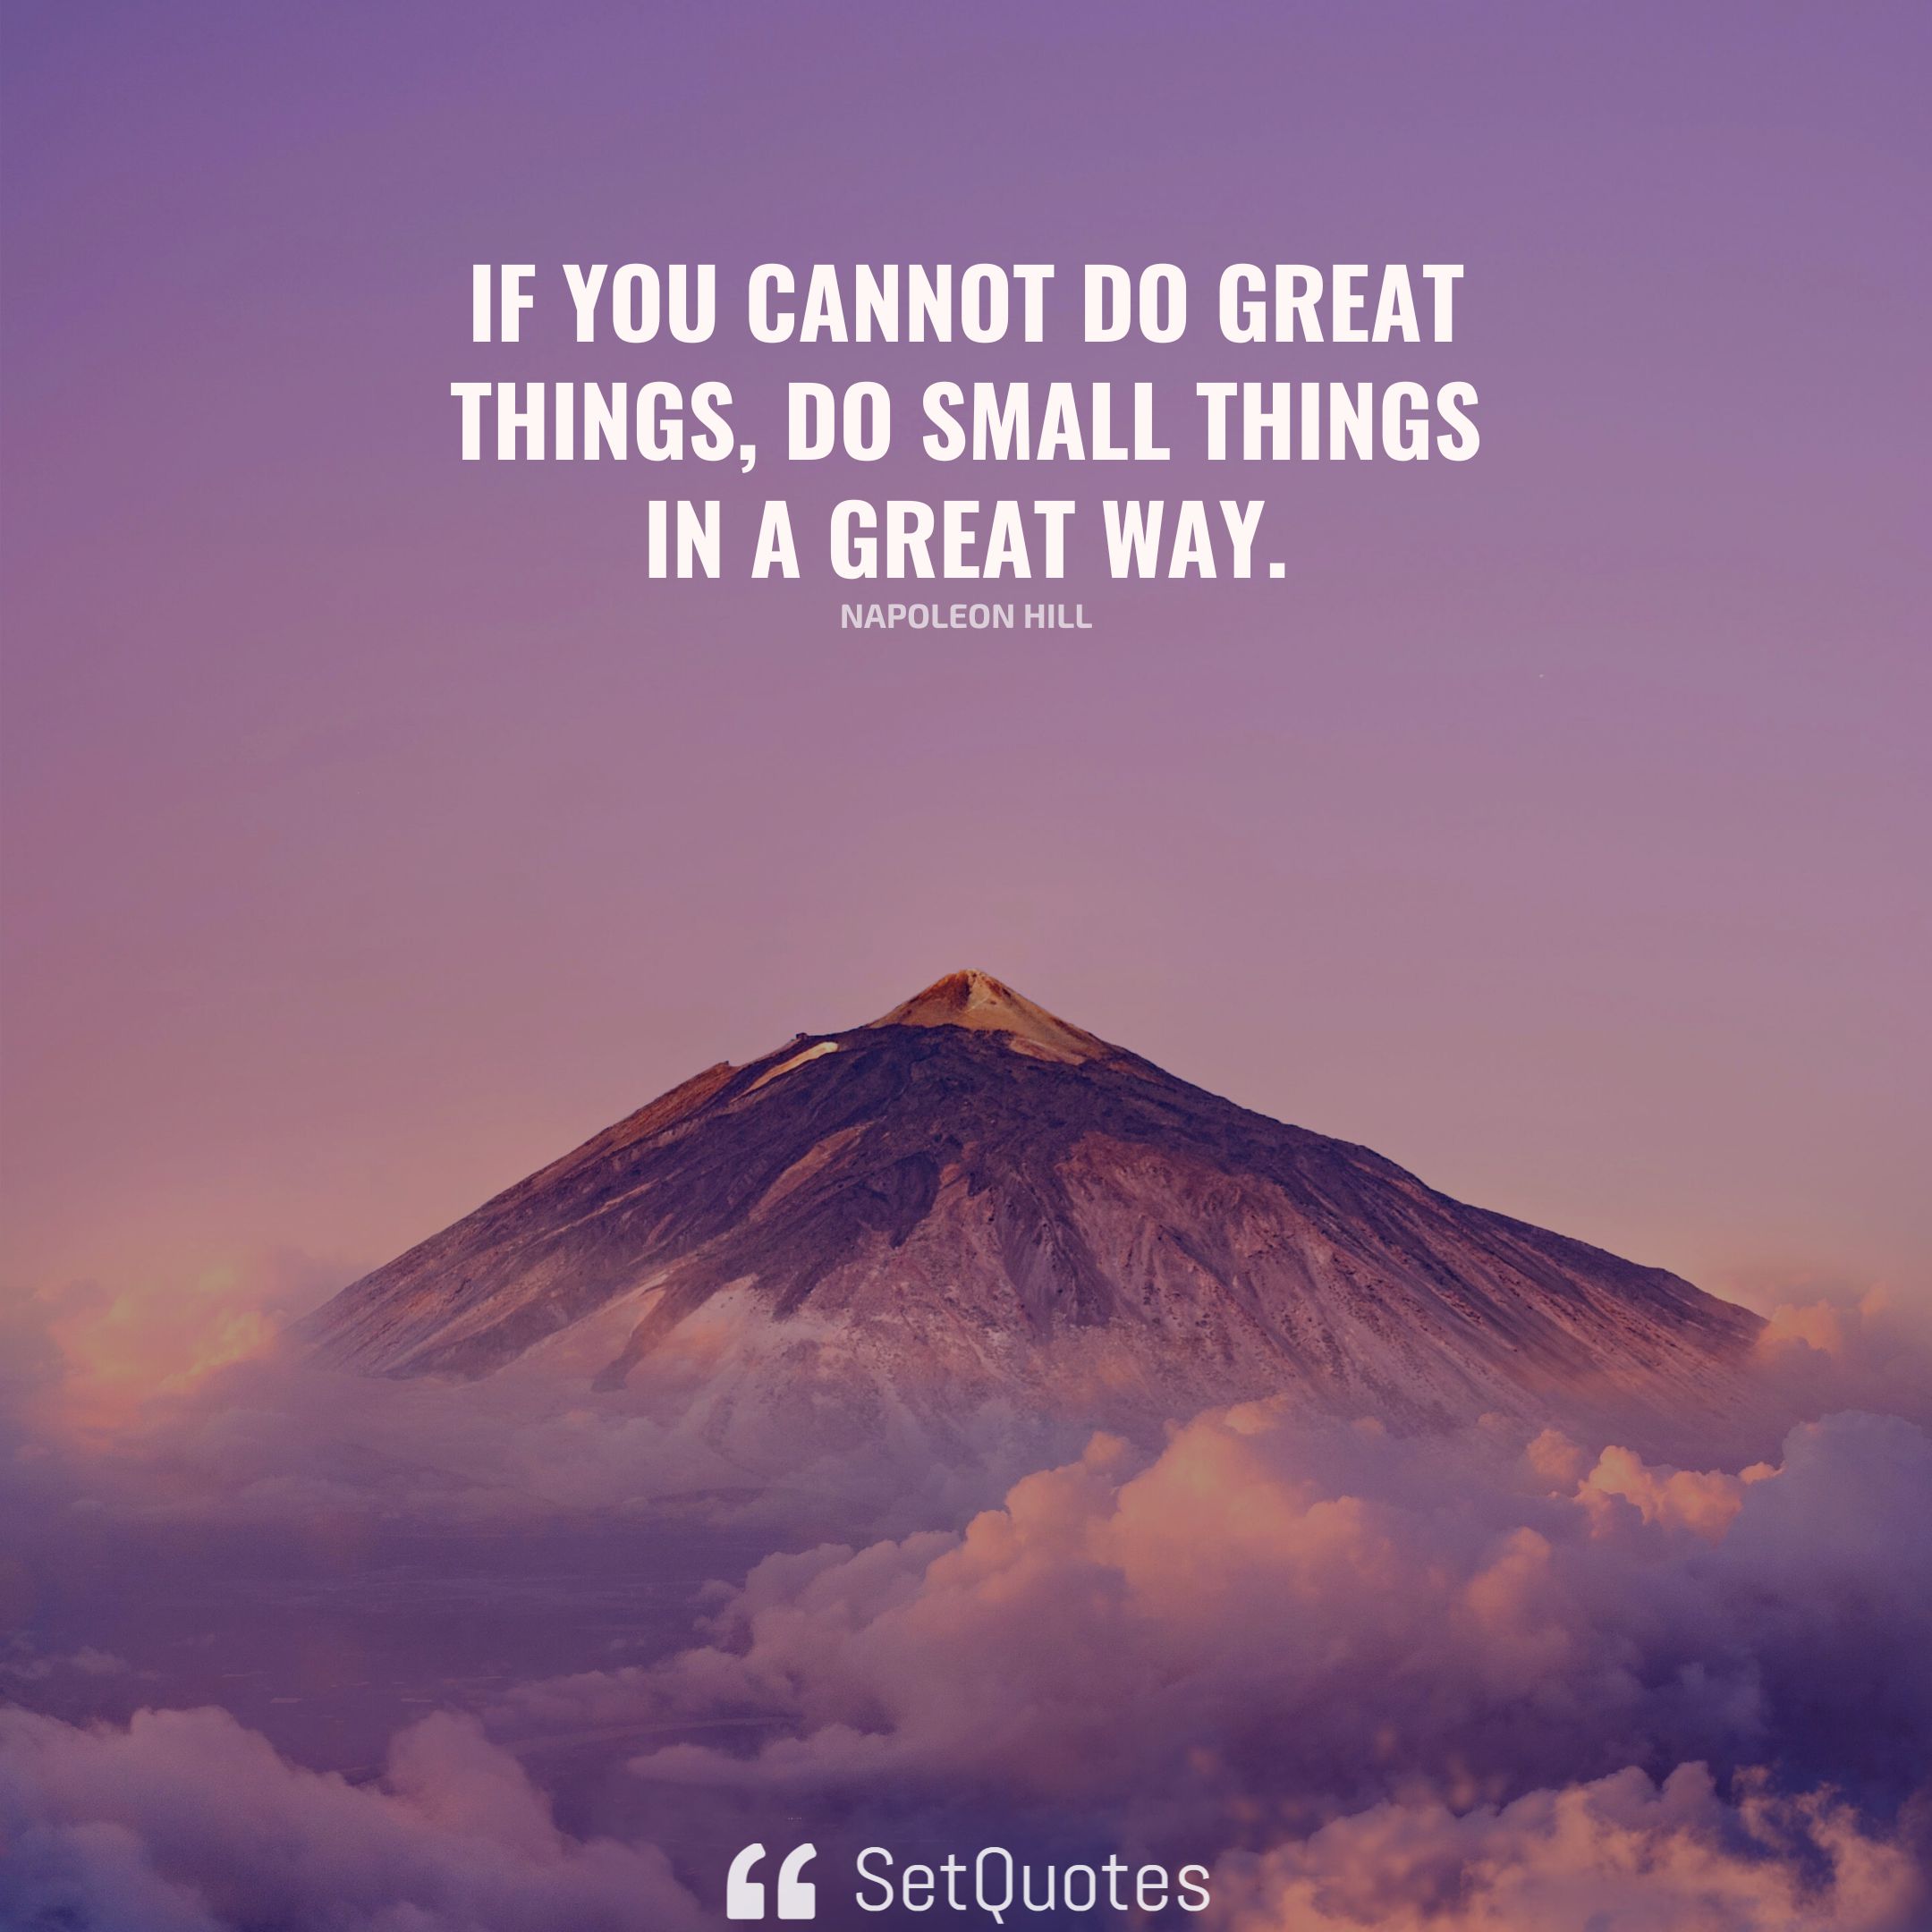 If you cannot do great things, do small things in a great way. - Napoleon Hill (SetQuotes)